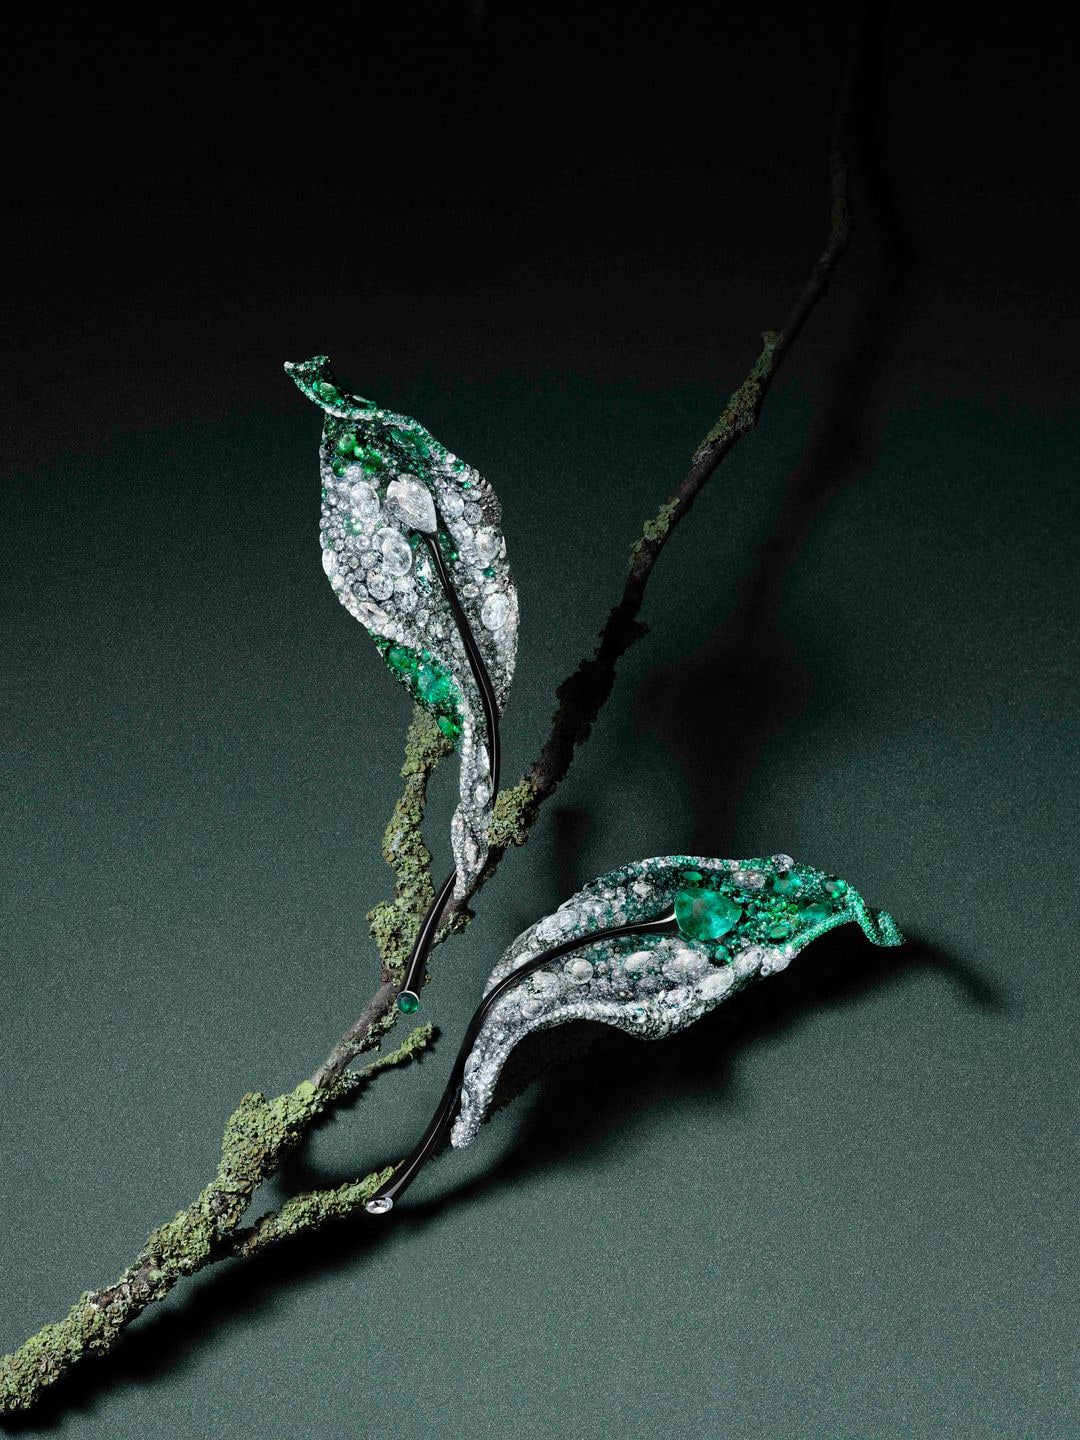  Chao's spatial sensibility and sculptural skills bring an element of realism to the sculpted leaves 